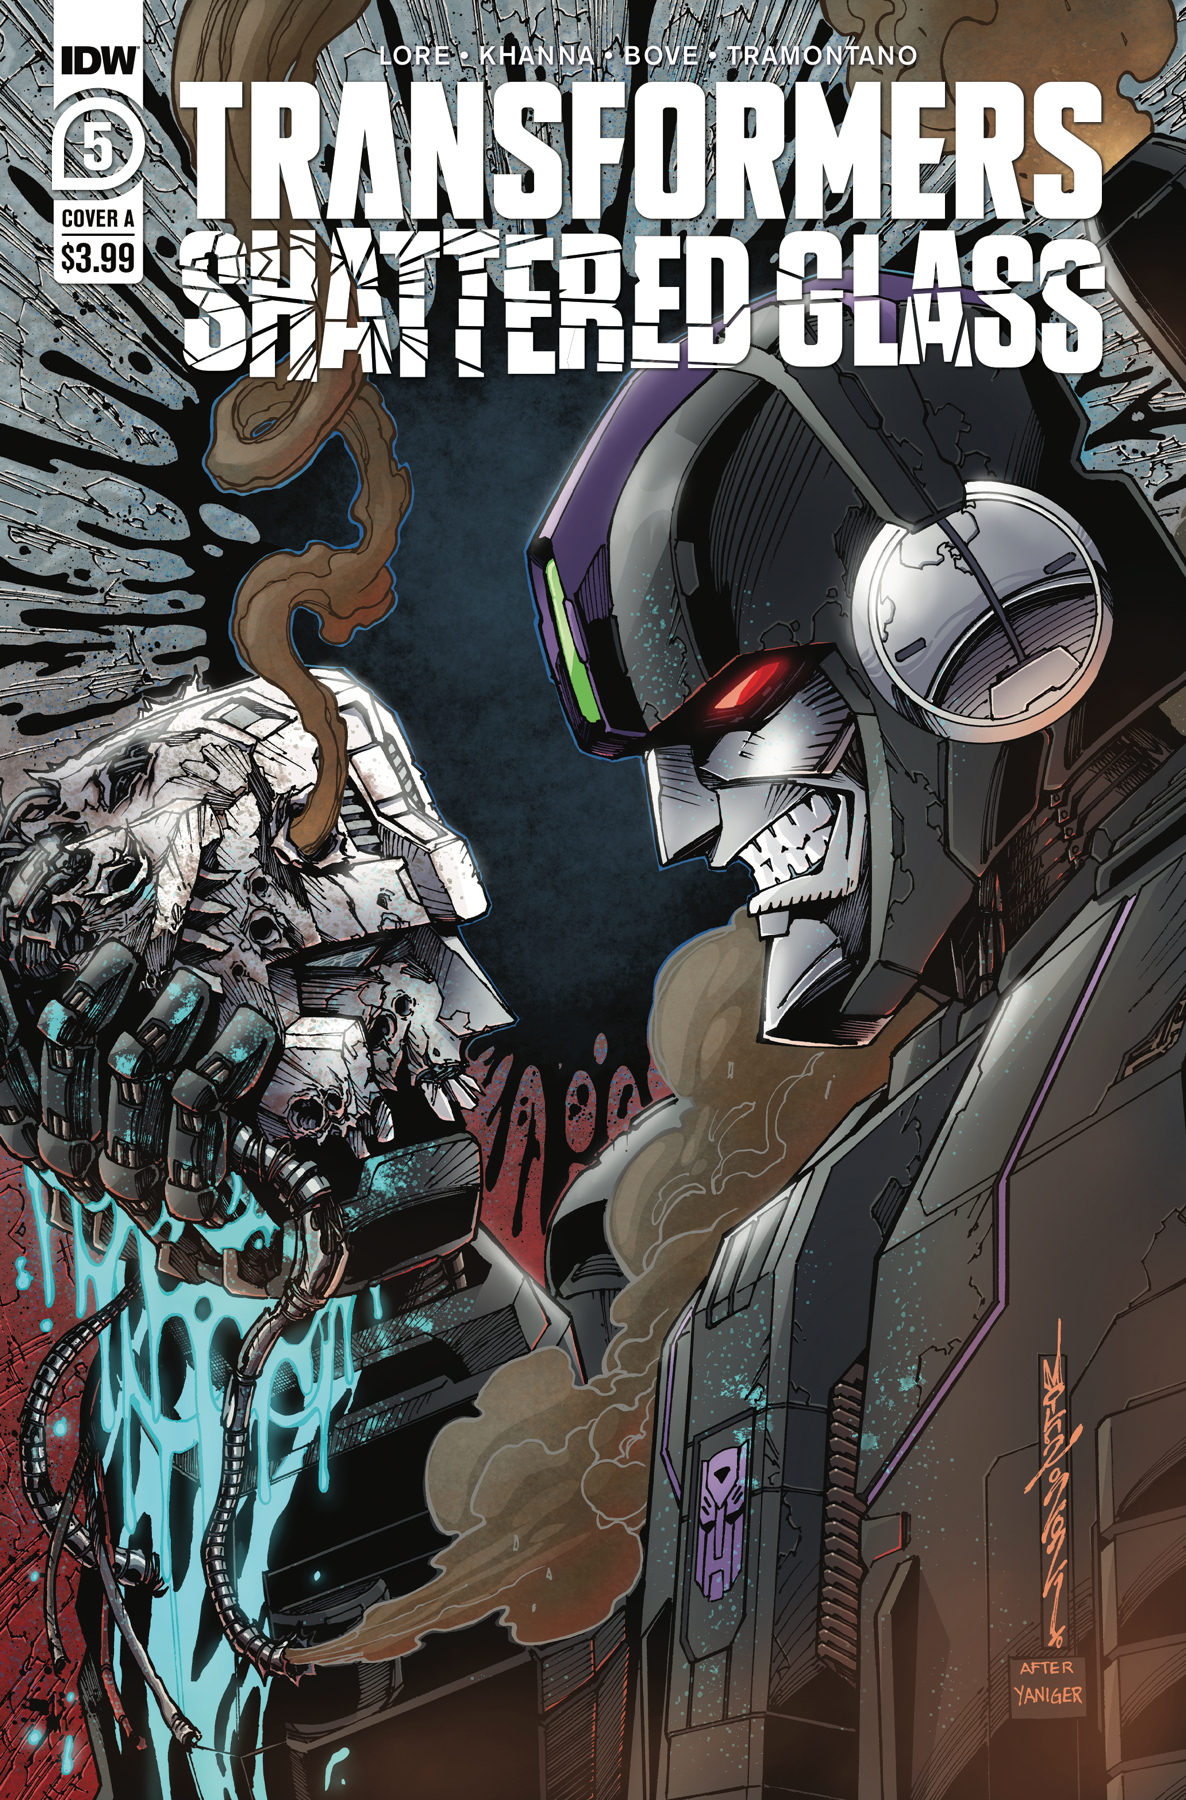 Transformers Shattered Glass #5 Cover A Milne (Of 5)